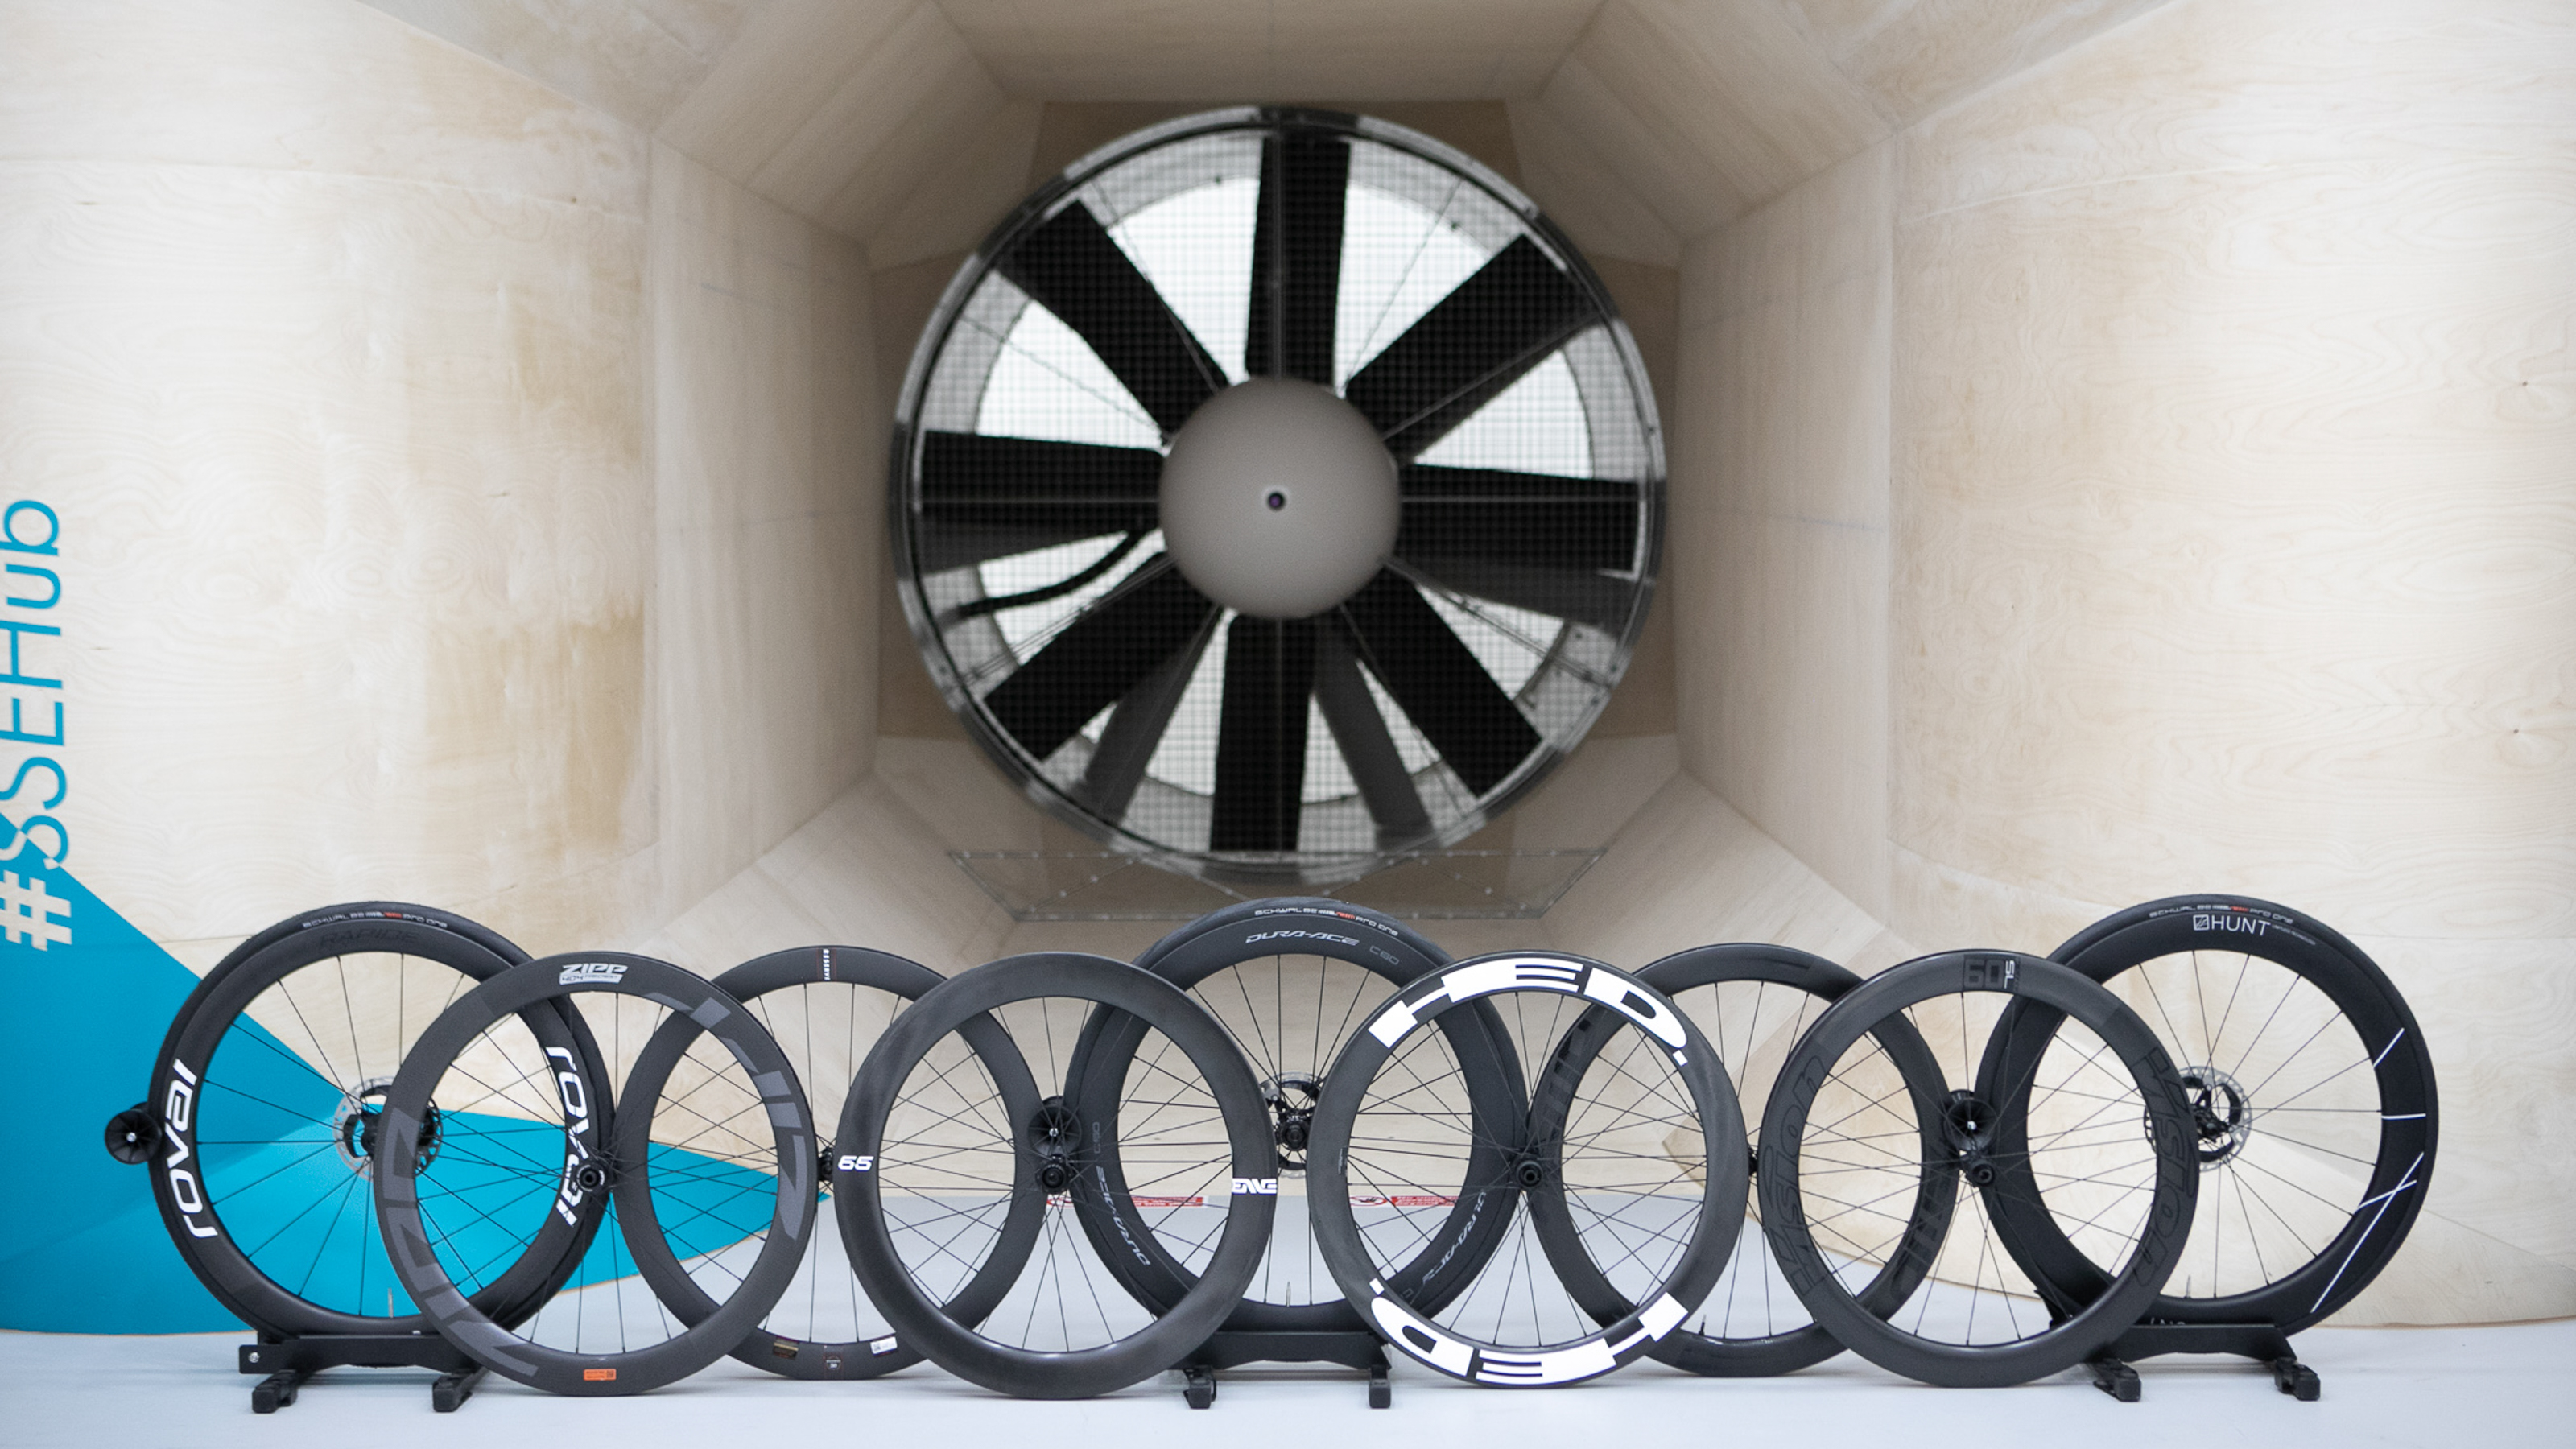 We took 10 road wheelsets to the wind tunnel, here are the results